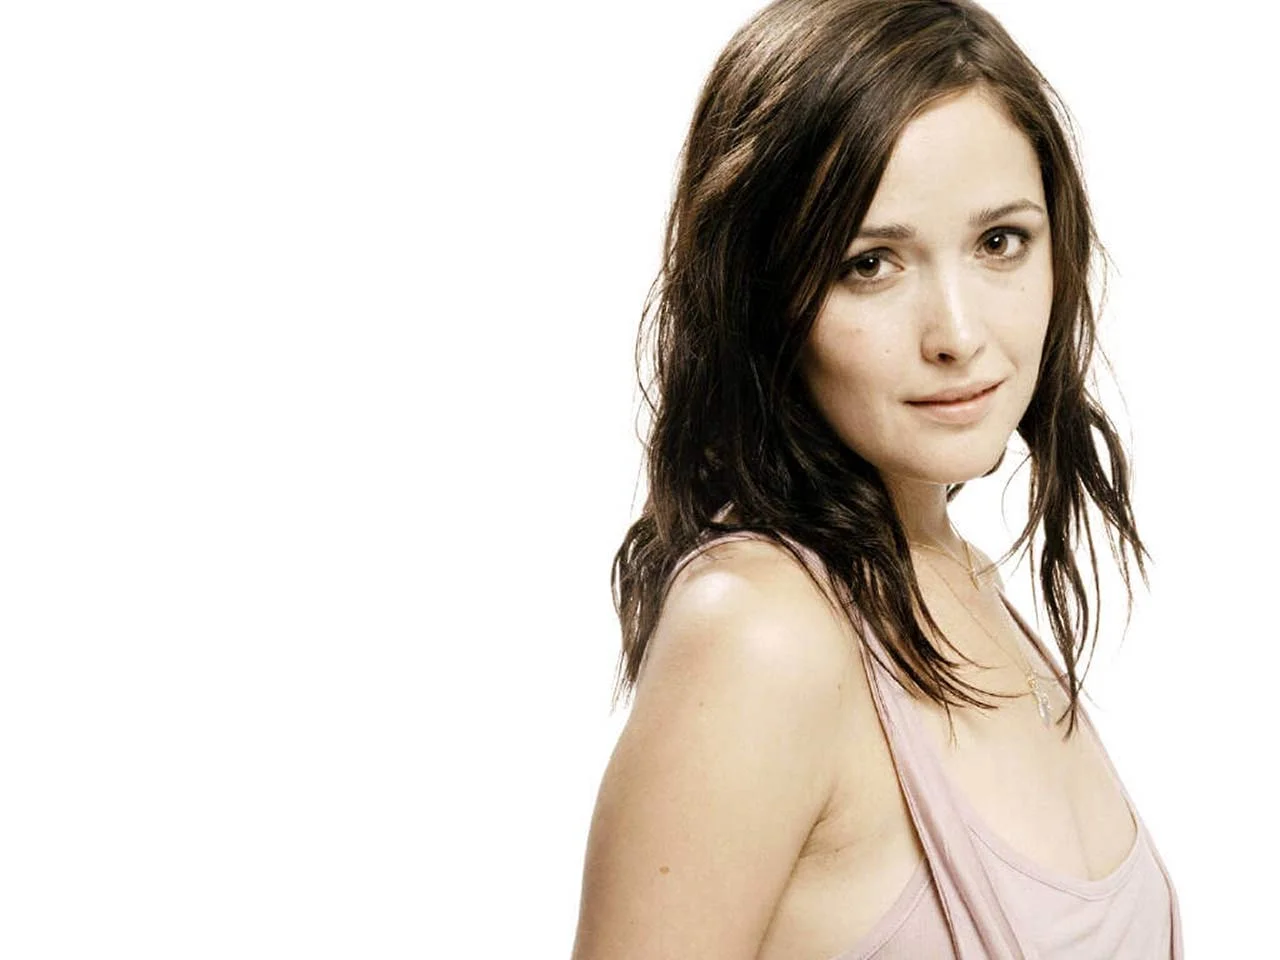 1710345021 532 Sexy Rose Byrne Ass and Boobs Photos.webp